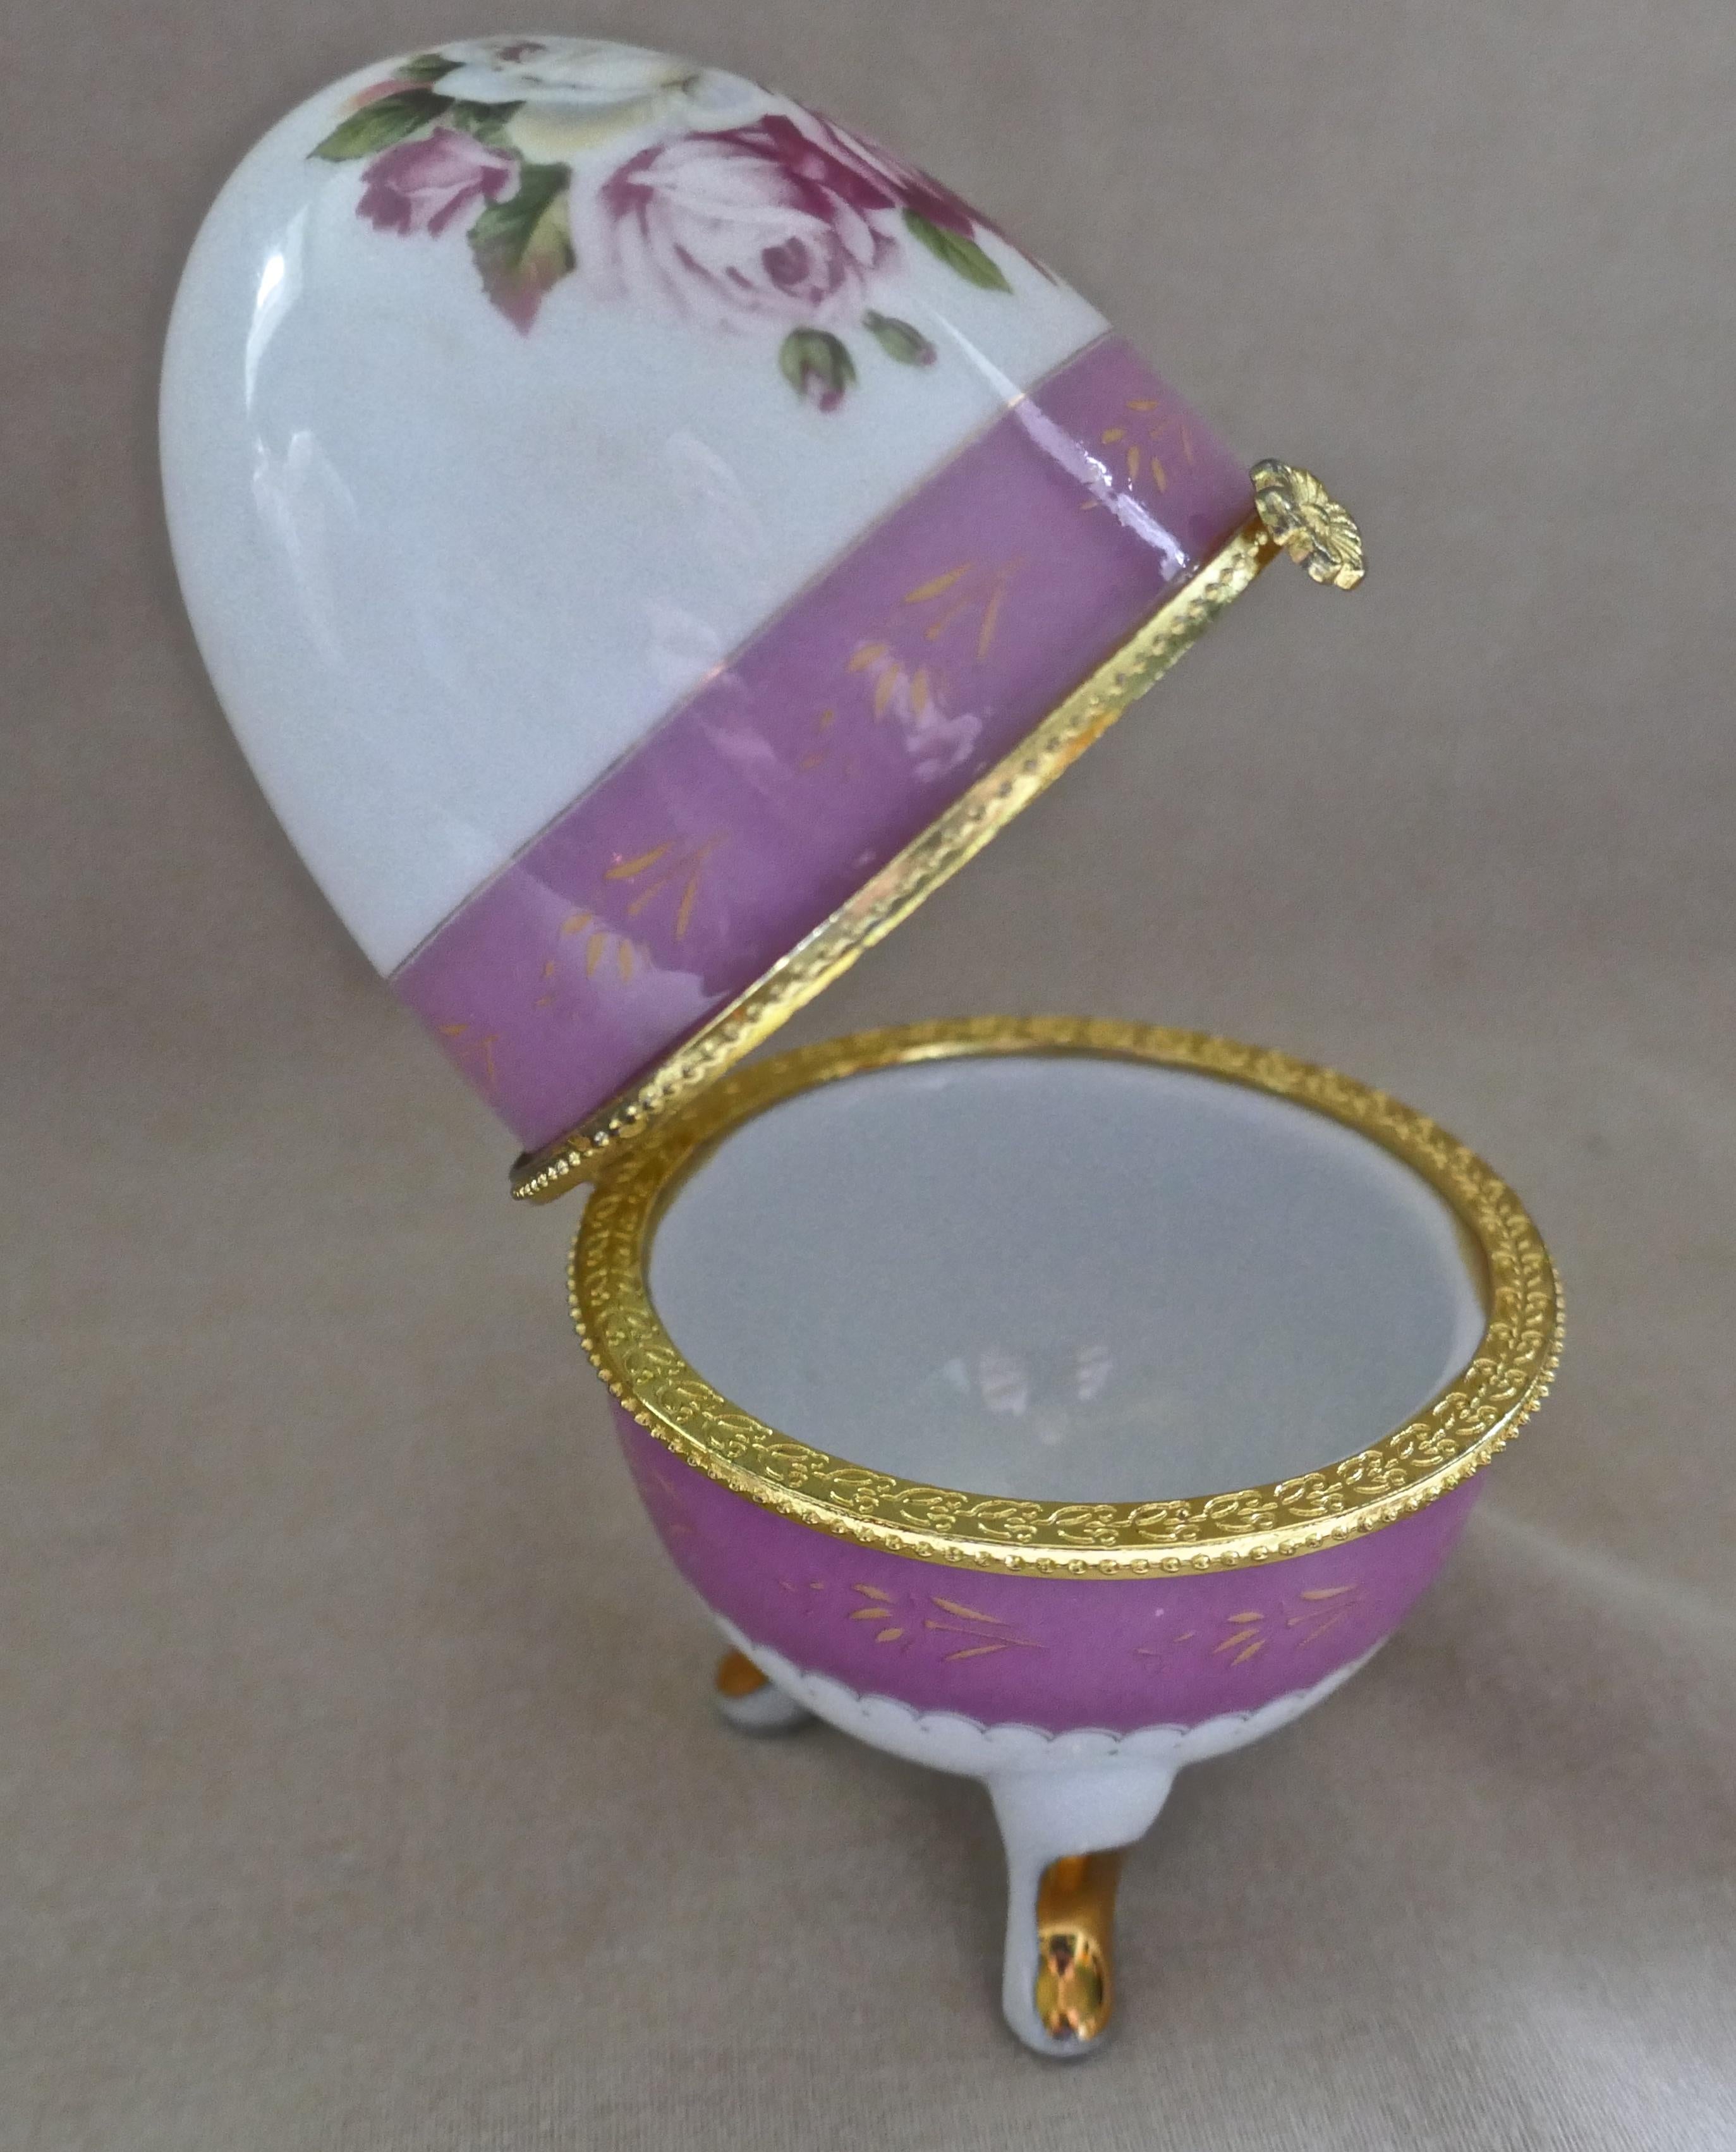 Vintage Rose Chintz Egg Shaped Ceramic Trinket Box with Hinged Lid In Good Condition For Sale In Chillerton, Isle of Wight